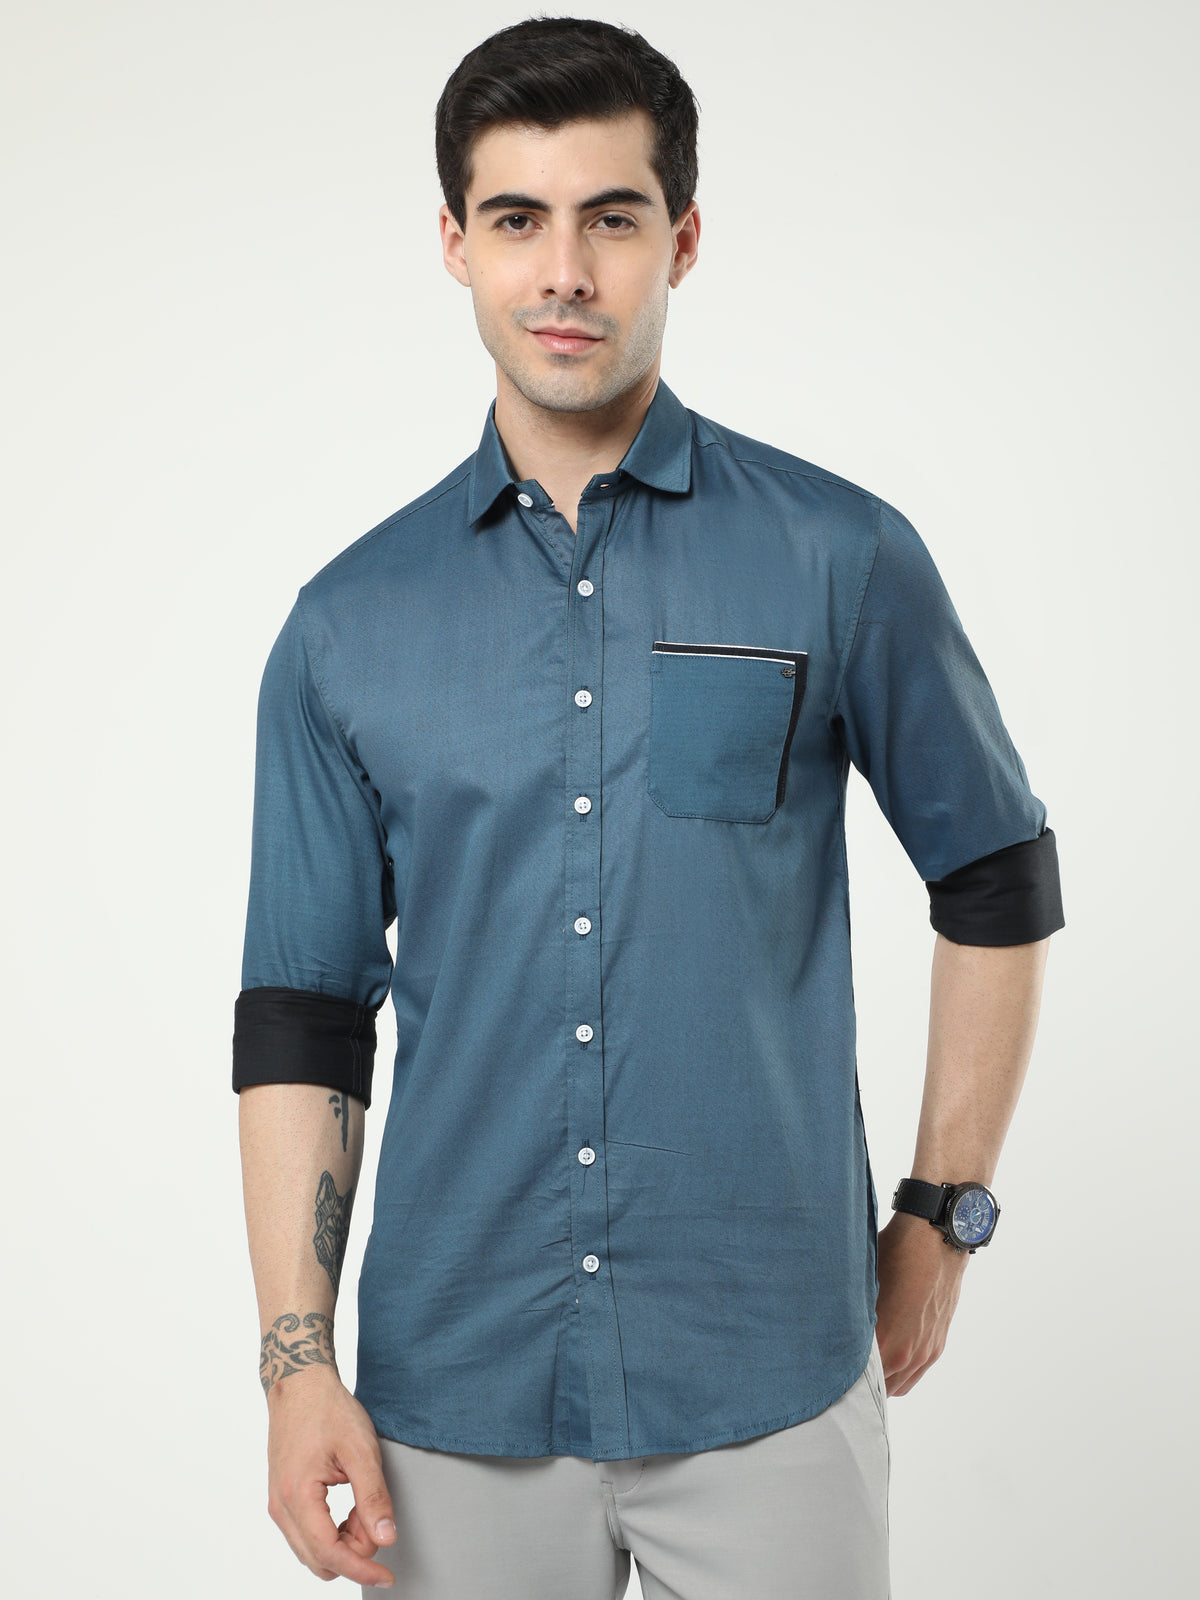 Stylish Mens Wear Shirts Collection from SO DESIGN – SO DESIGN FACTORY ...